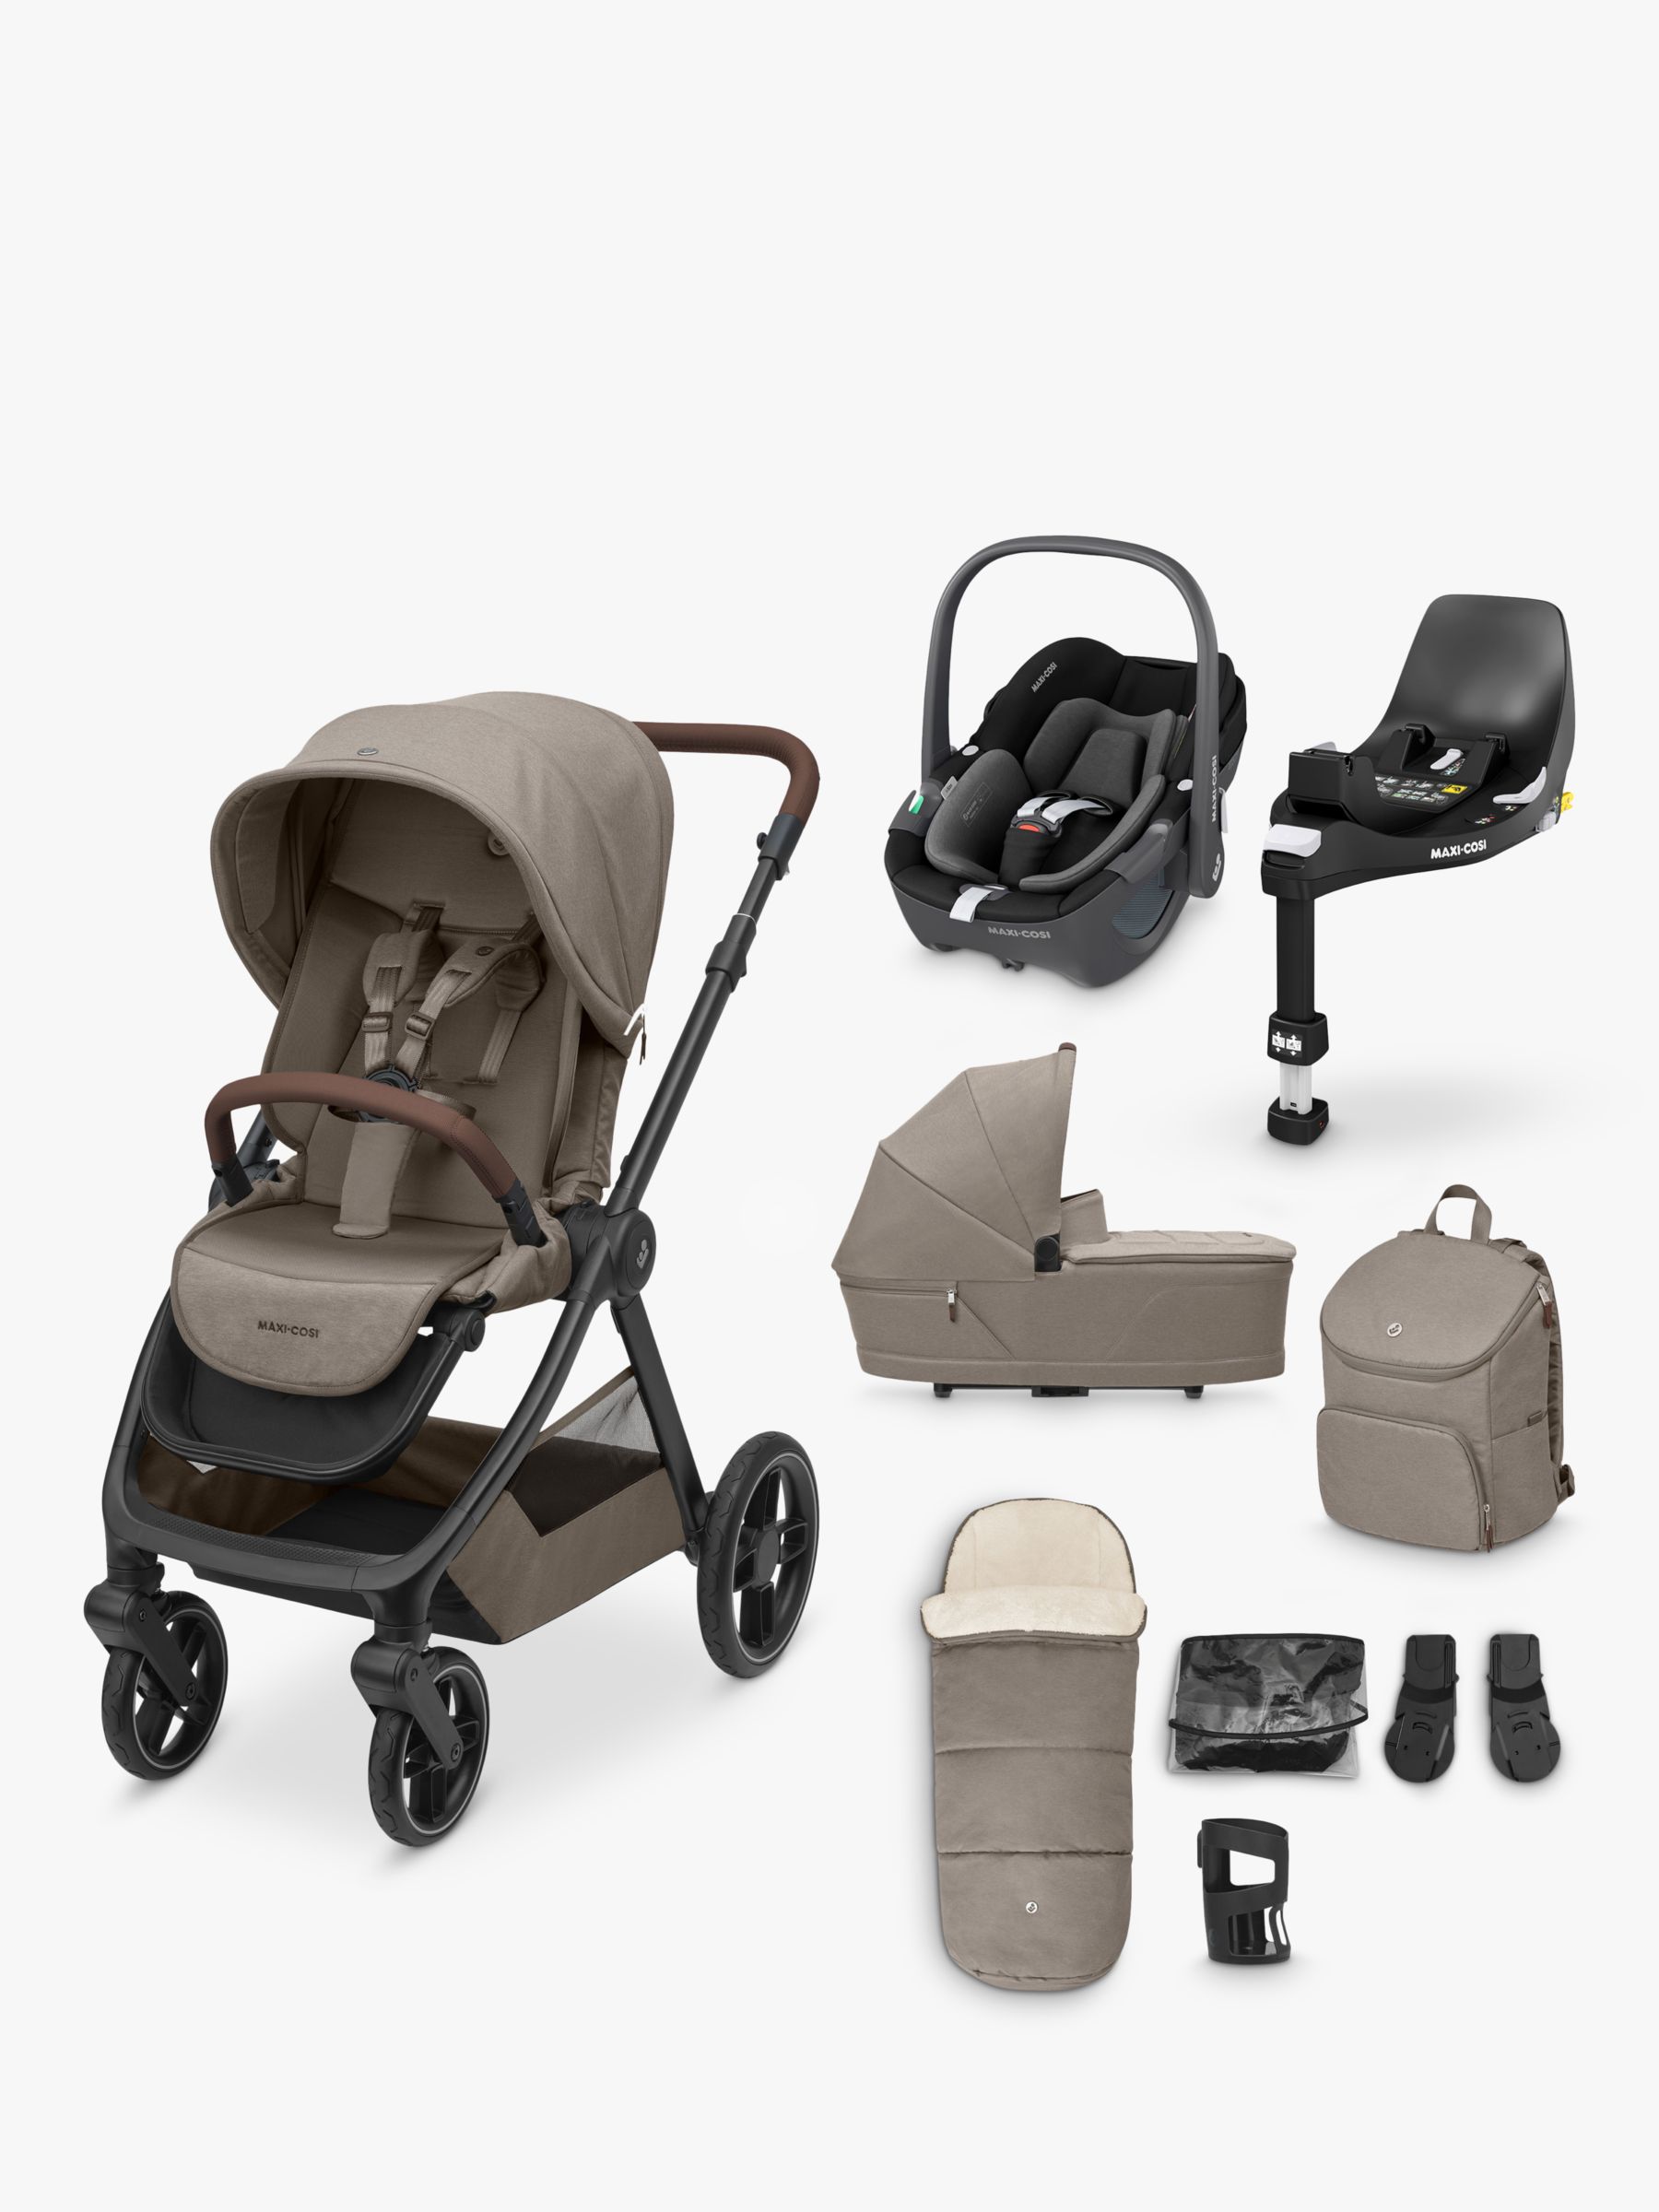 Maxi-Cosi Oxford Pushchair & Accessories with Pebble 360 Car Seat and FamilyFix Base Bundle